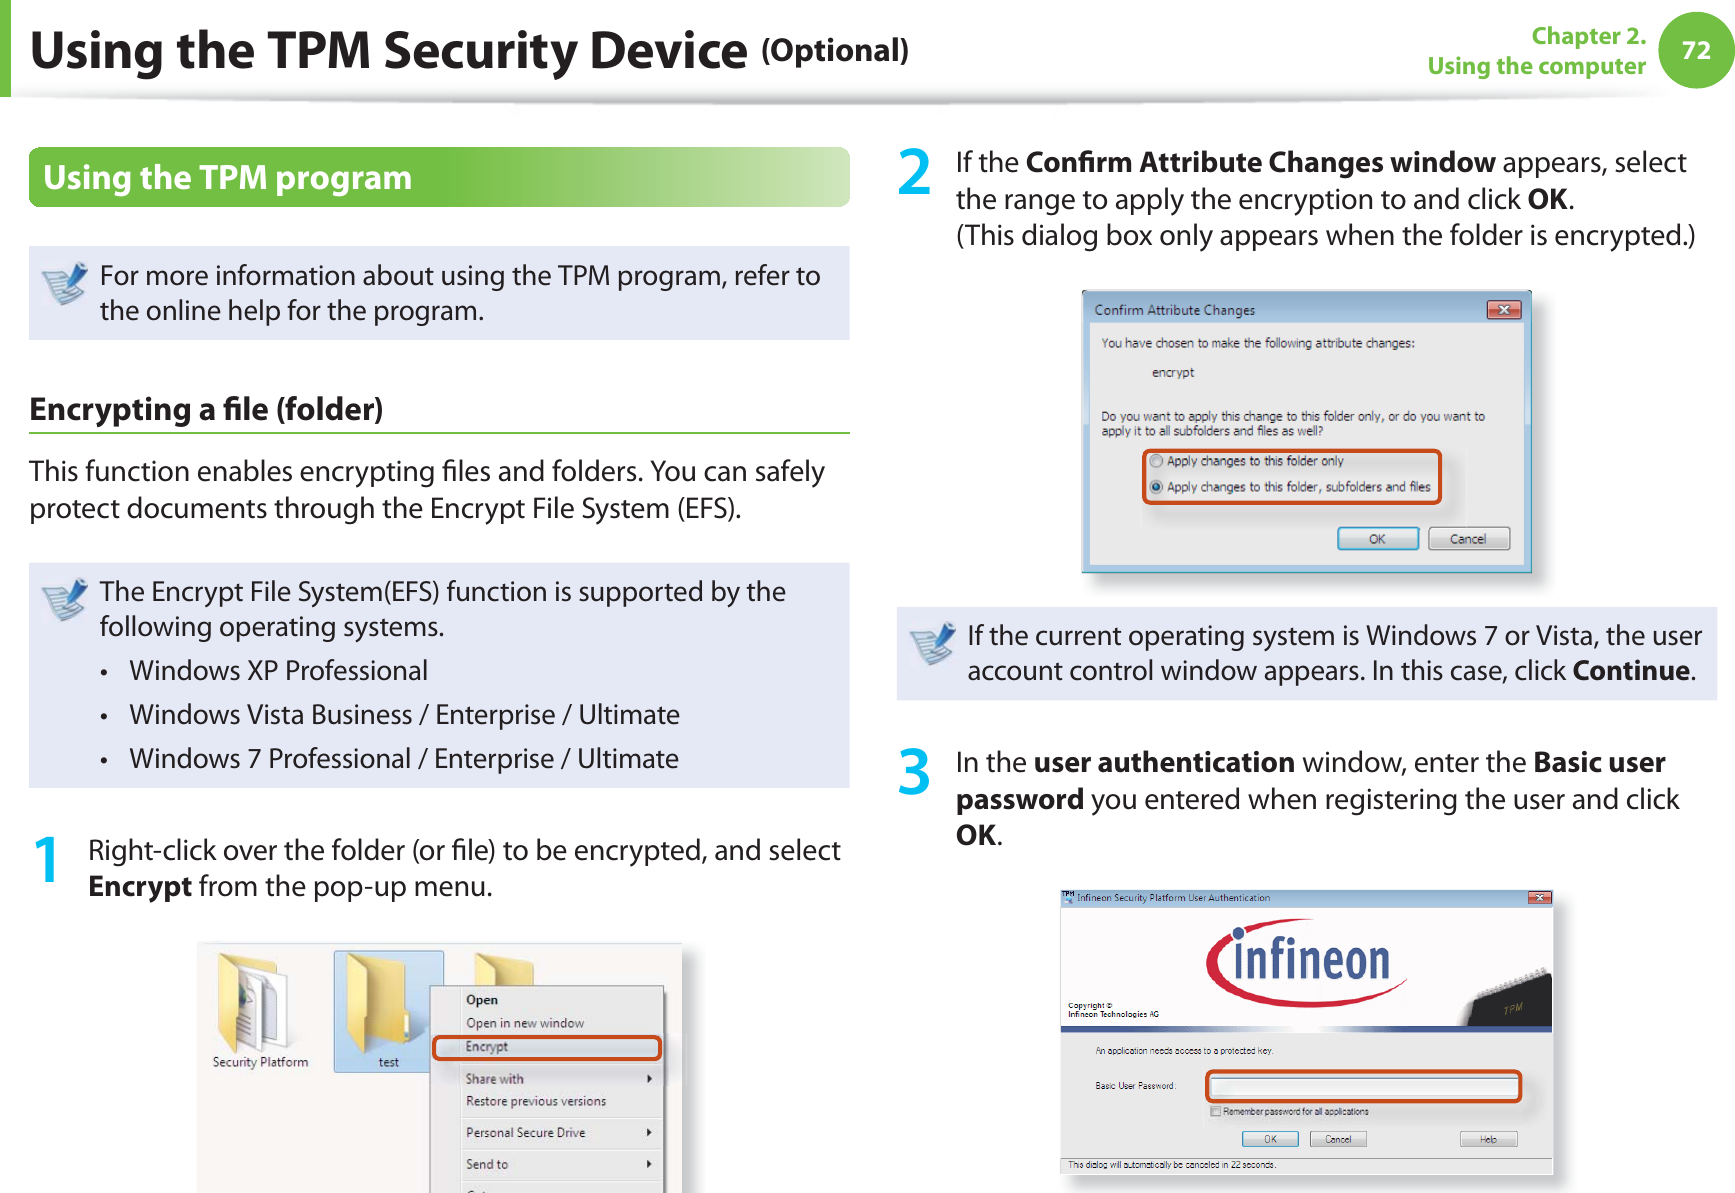 72Chapter 2. Using the computerUsing the TPM Security Device (Optional)Using the TPM programFor more information about using the TPM program, refer to the online help for the program.Encrypting a  le (folder) This function enables encrypting  les and folders. You can safely protect documents through the Encrypt File System (EFS).The Encrypt File System(EFS) function is supported by the following operating systems.Windows XP Professional t Windows Vista Business / Enterprise / Ultimatet Windows 7 Professional / Enterprise / Ultimate t 1  Right-click over the folder (or  le) to be encrypted, and select Encrypt from the pop-up menu. 2 If the Con rm Attribute Changes window appears, select the range to apply the encryption to and click OK. (This dialog box only appears when the folder is encrypted.)If the current operating system is Windows 7 or Vista, the user account control window appears. In this case, click Continue.3 In the user authentication window, enter the Basic user password you entered when registering the user and click OK.